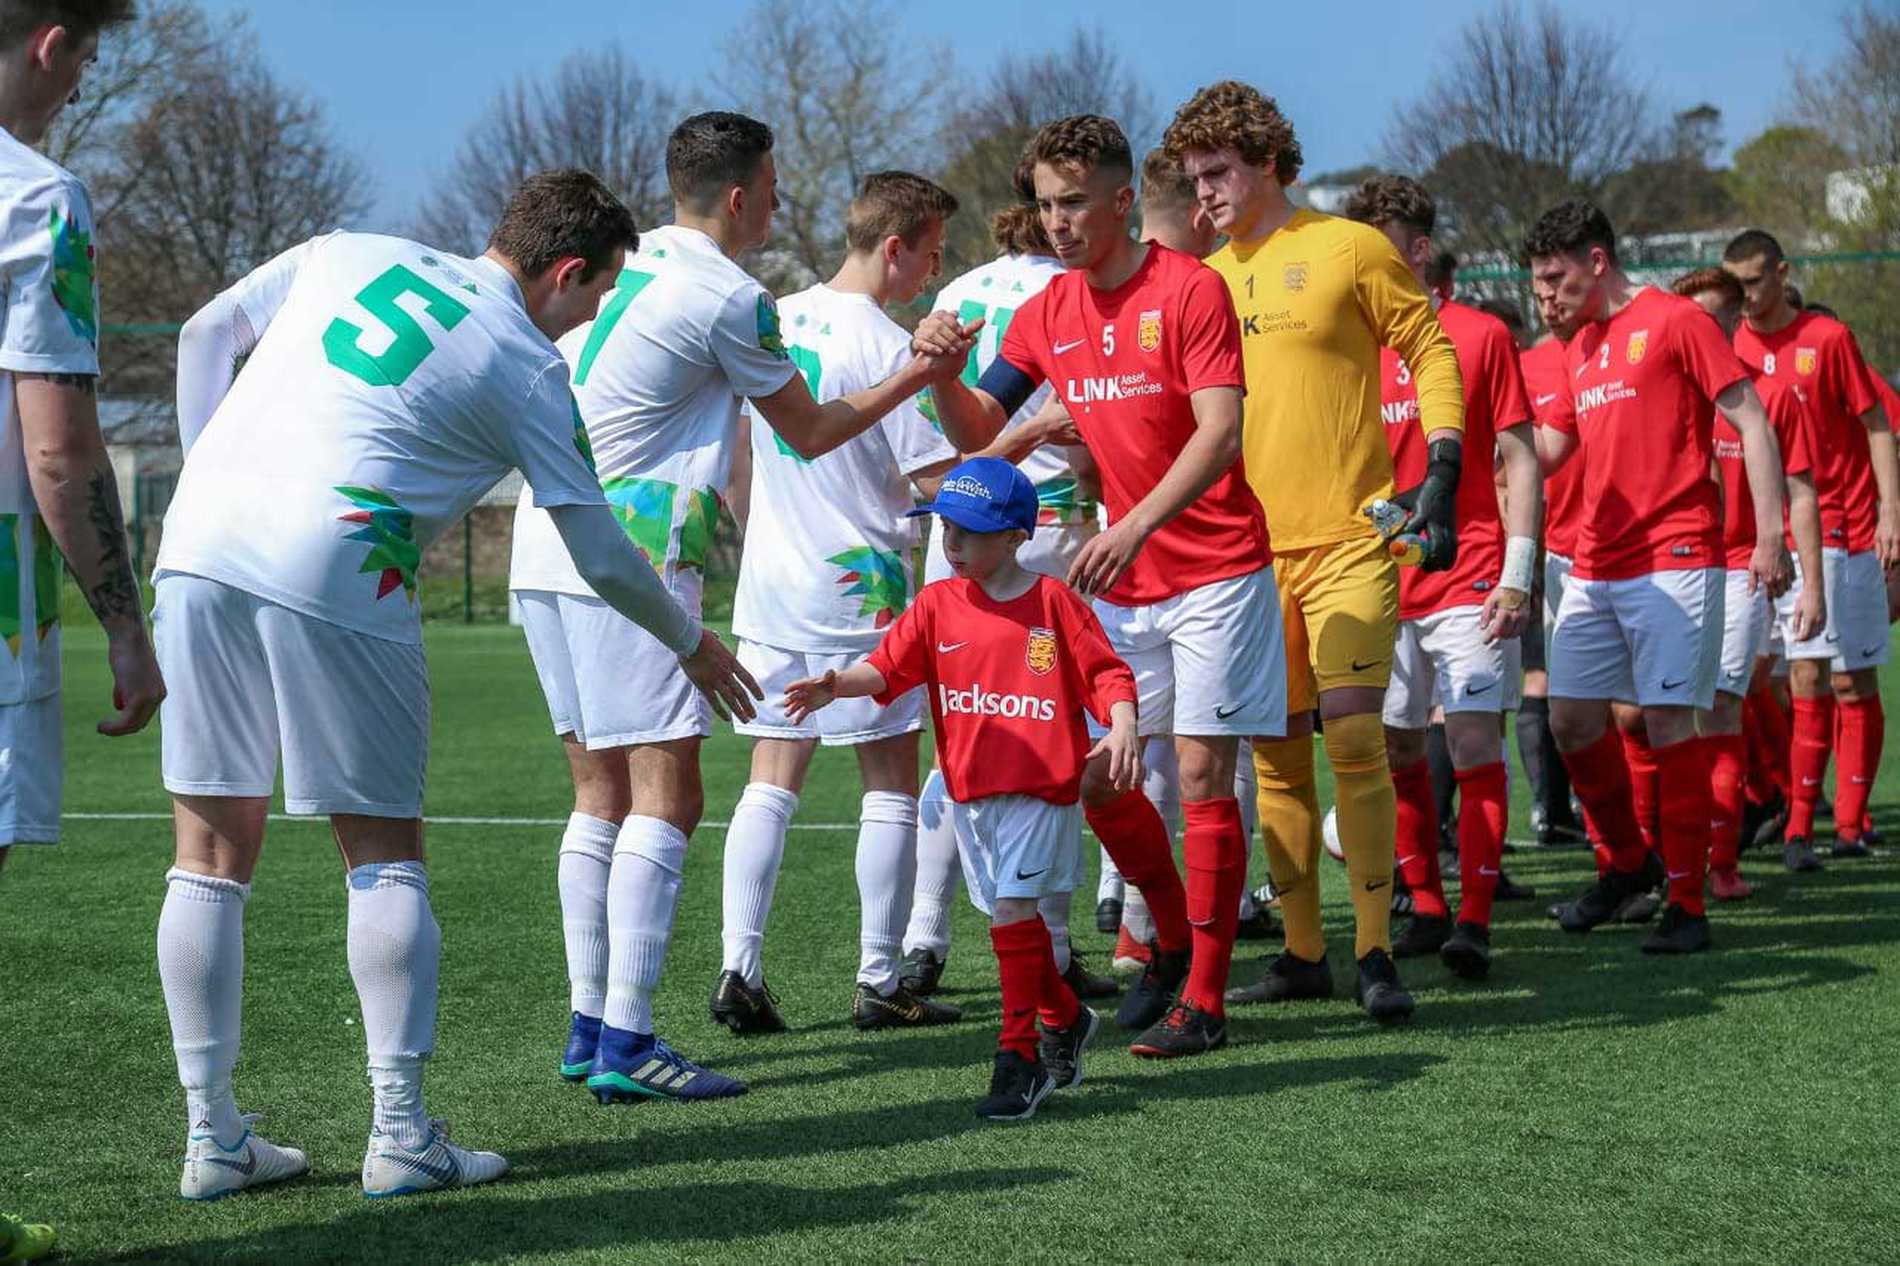 Wish child Jayden shaking hands with the players of the opposition during his wish